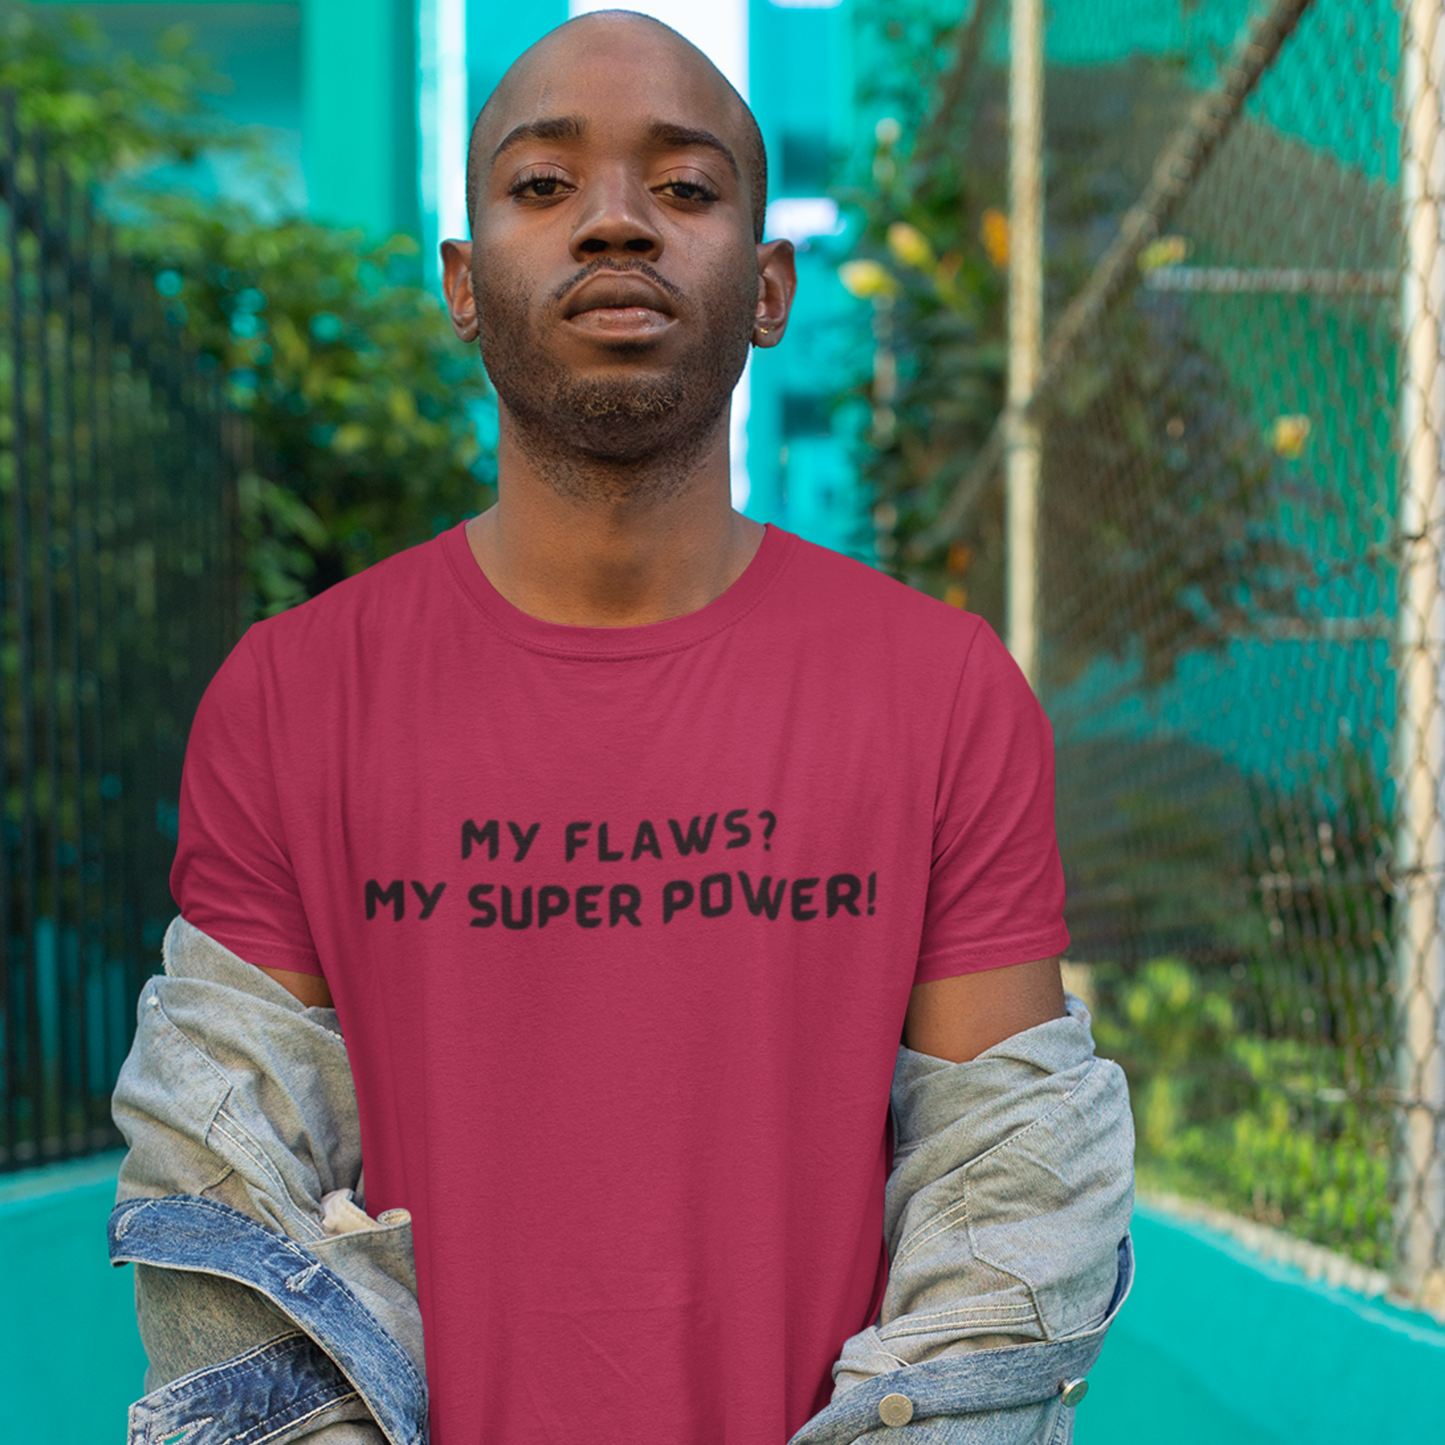 My flaws? My super power! unisex tshirt gift, T shirt with inspirational quotes